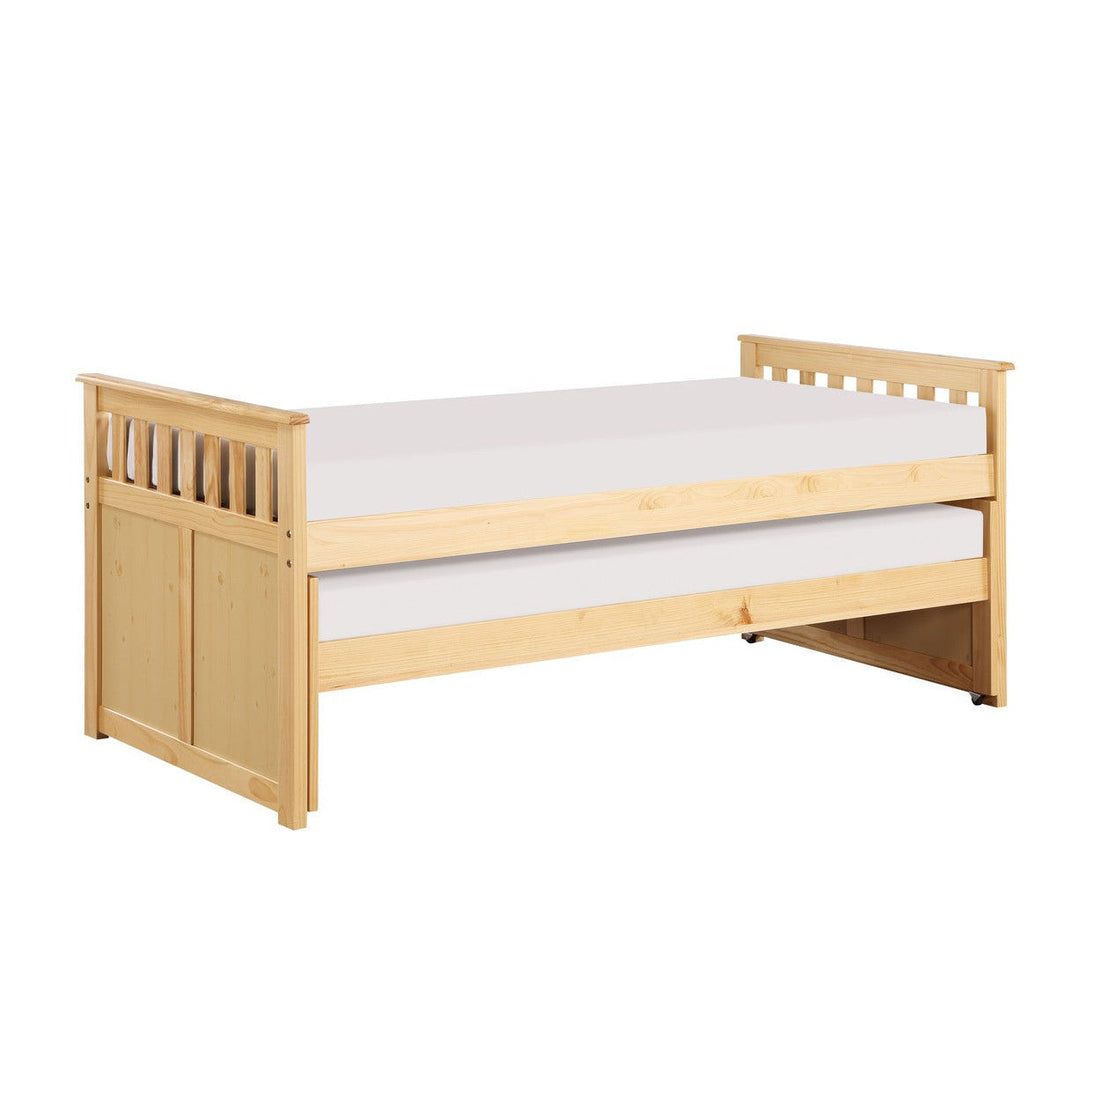 (3) TWIN/TWIN BED (WITHOUT TRUNDLE) B2043RT-1*